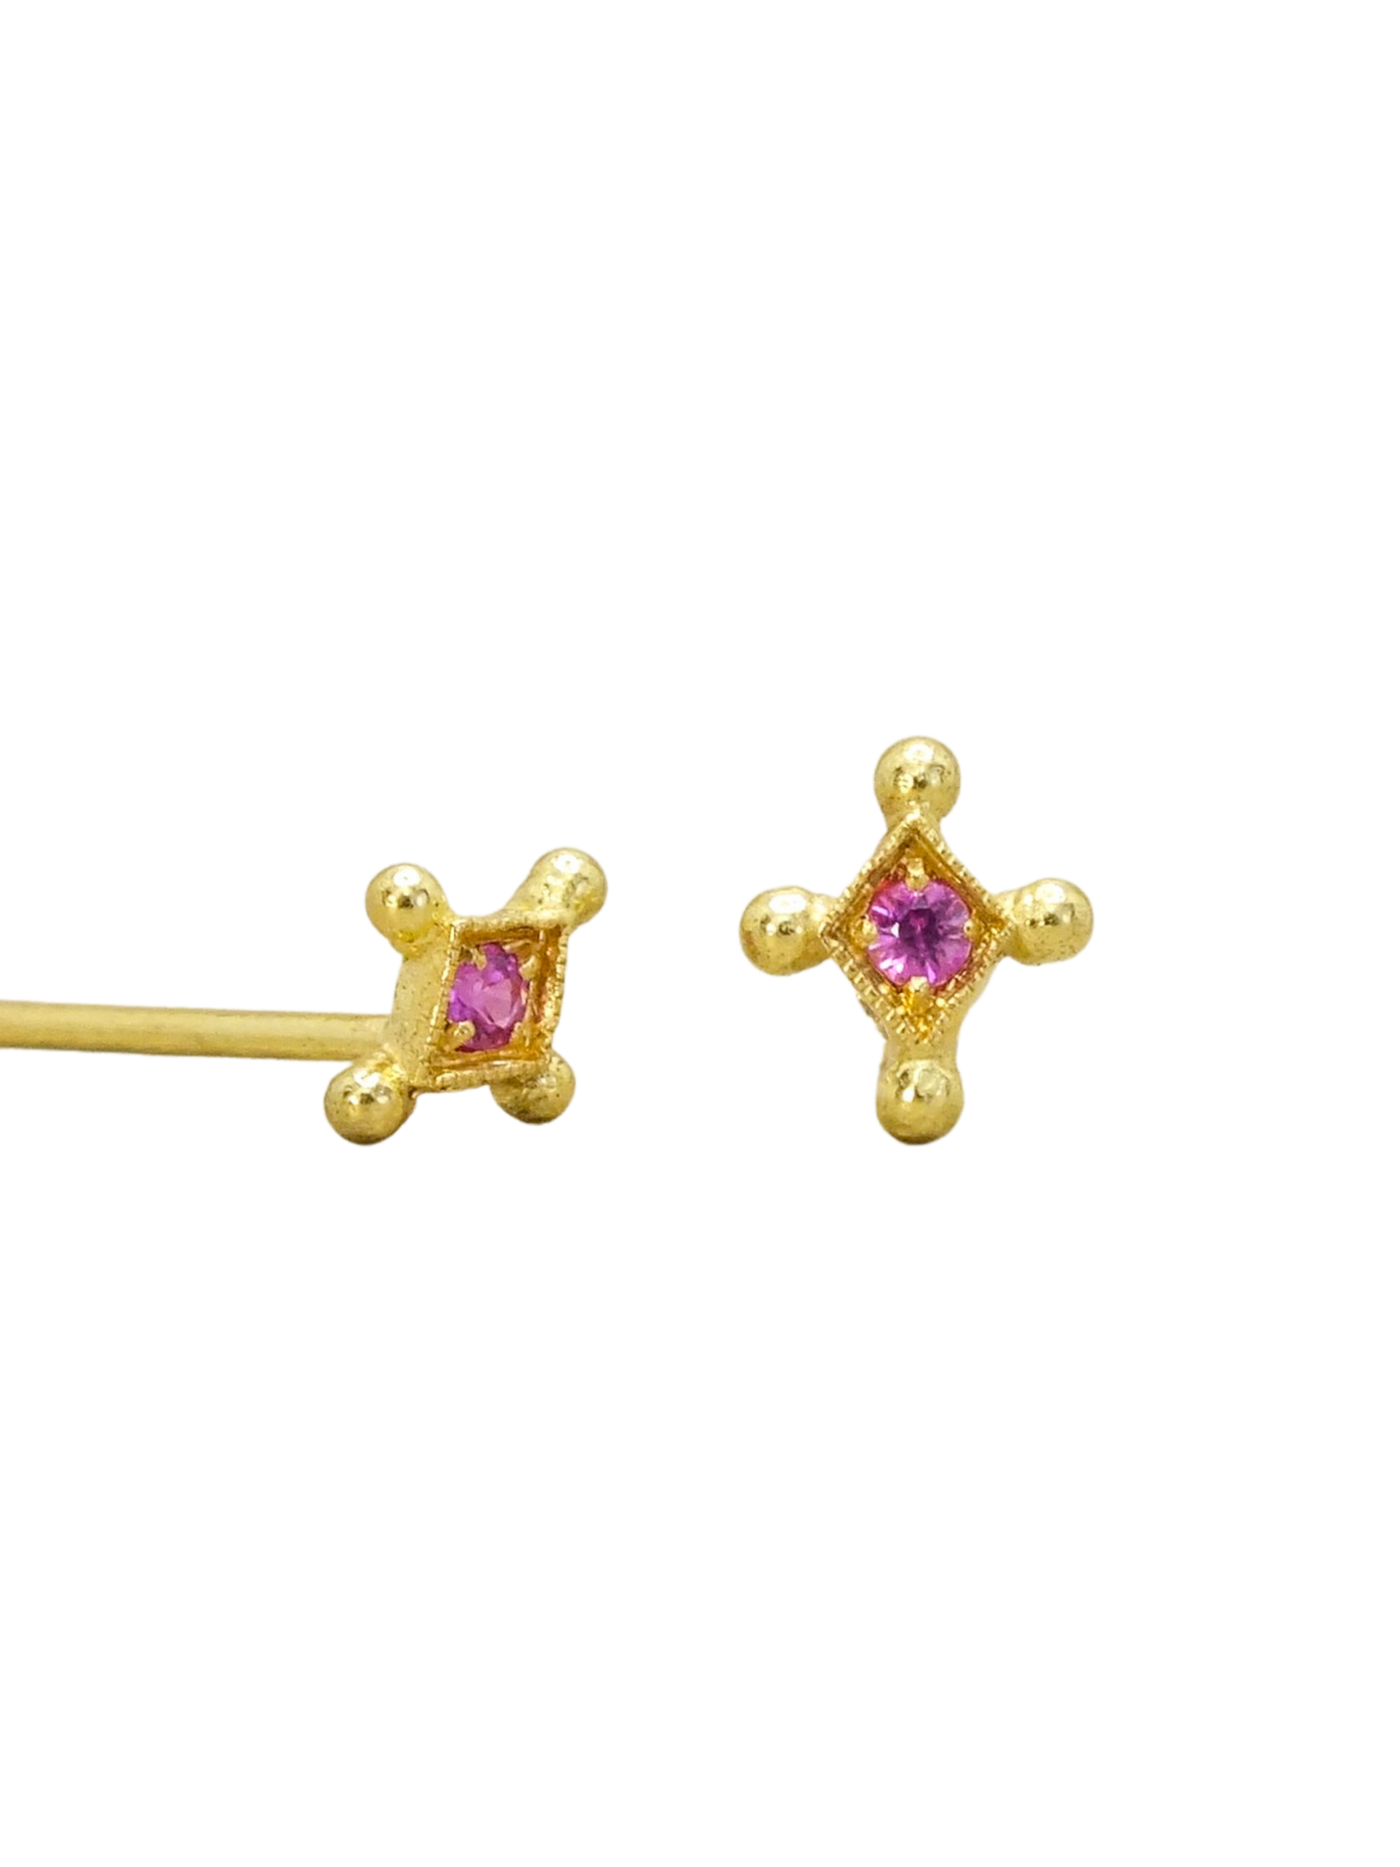 Temple of the Stars Pink Sapphire Stud Earrings